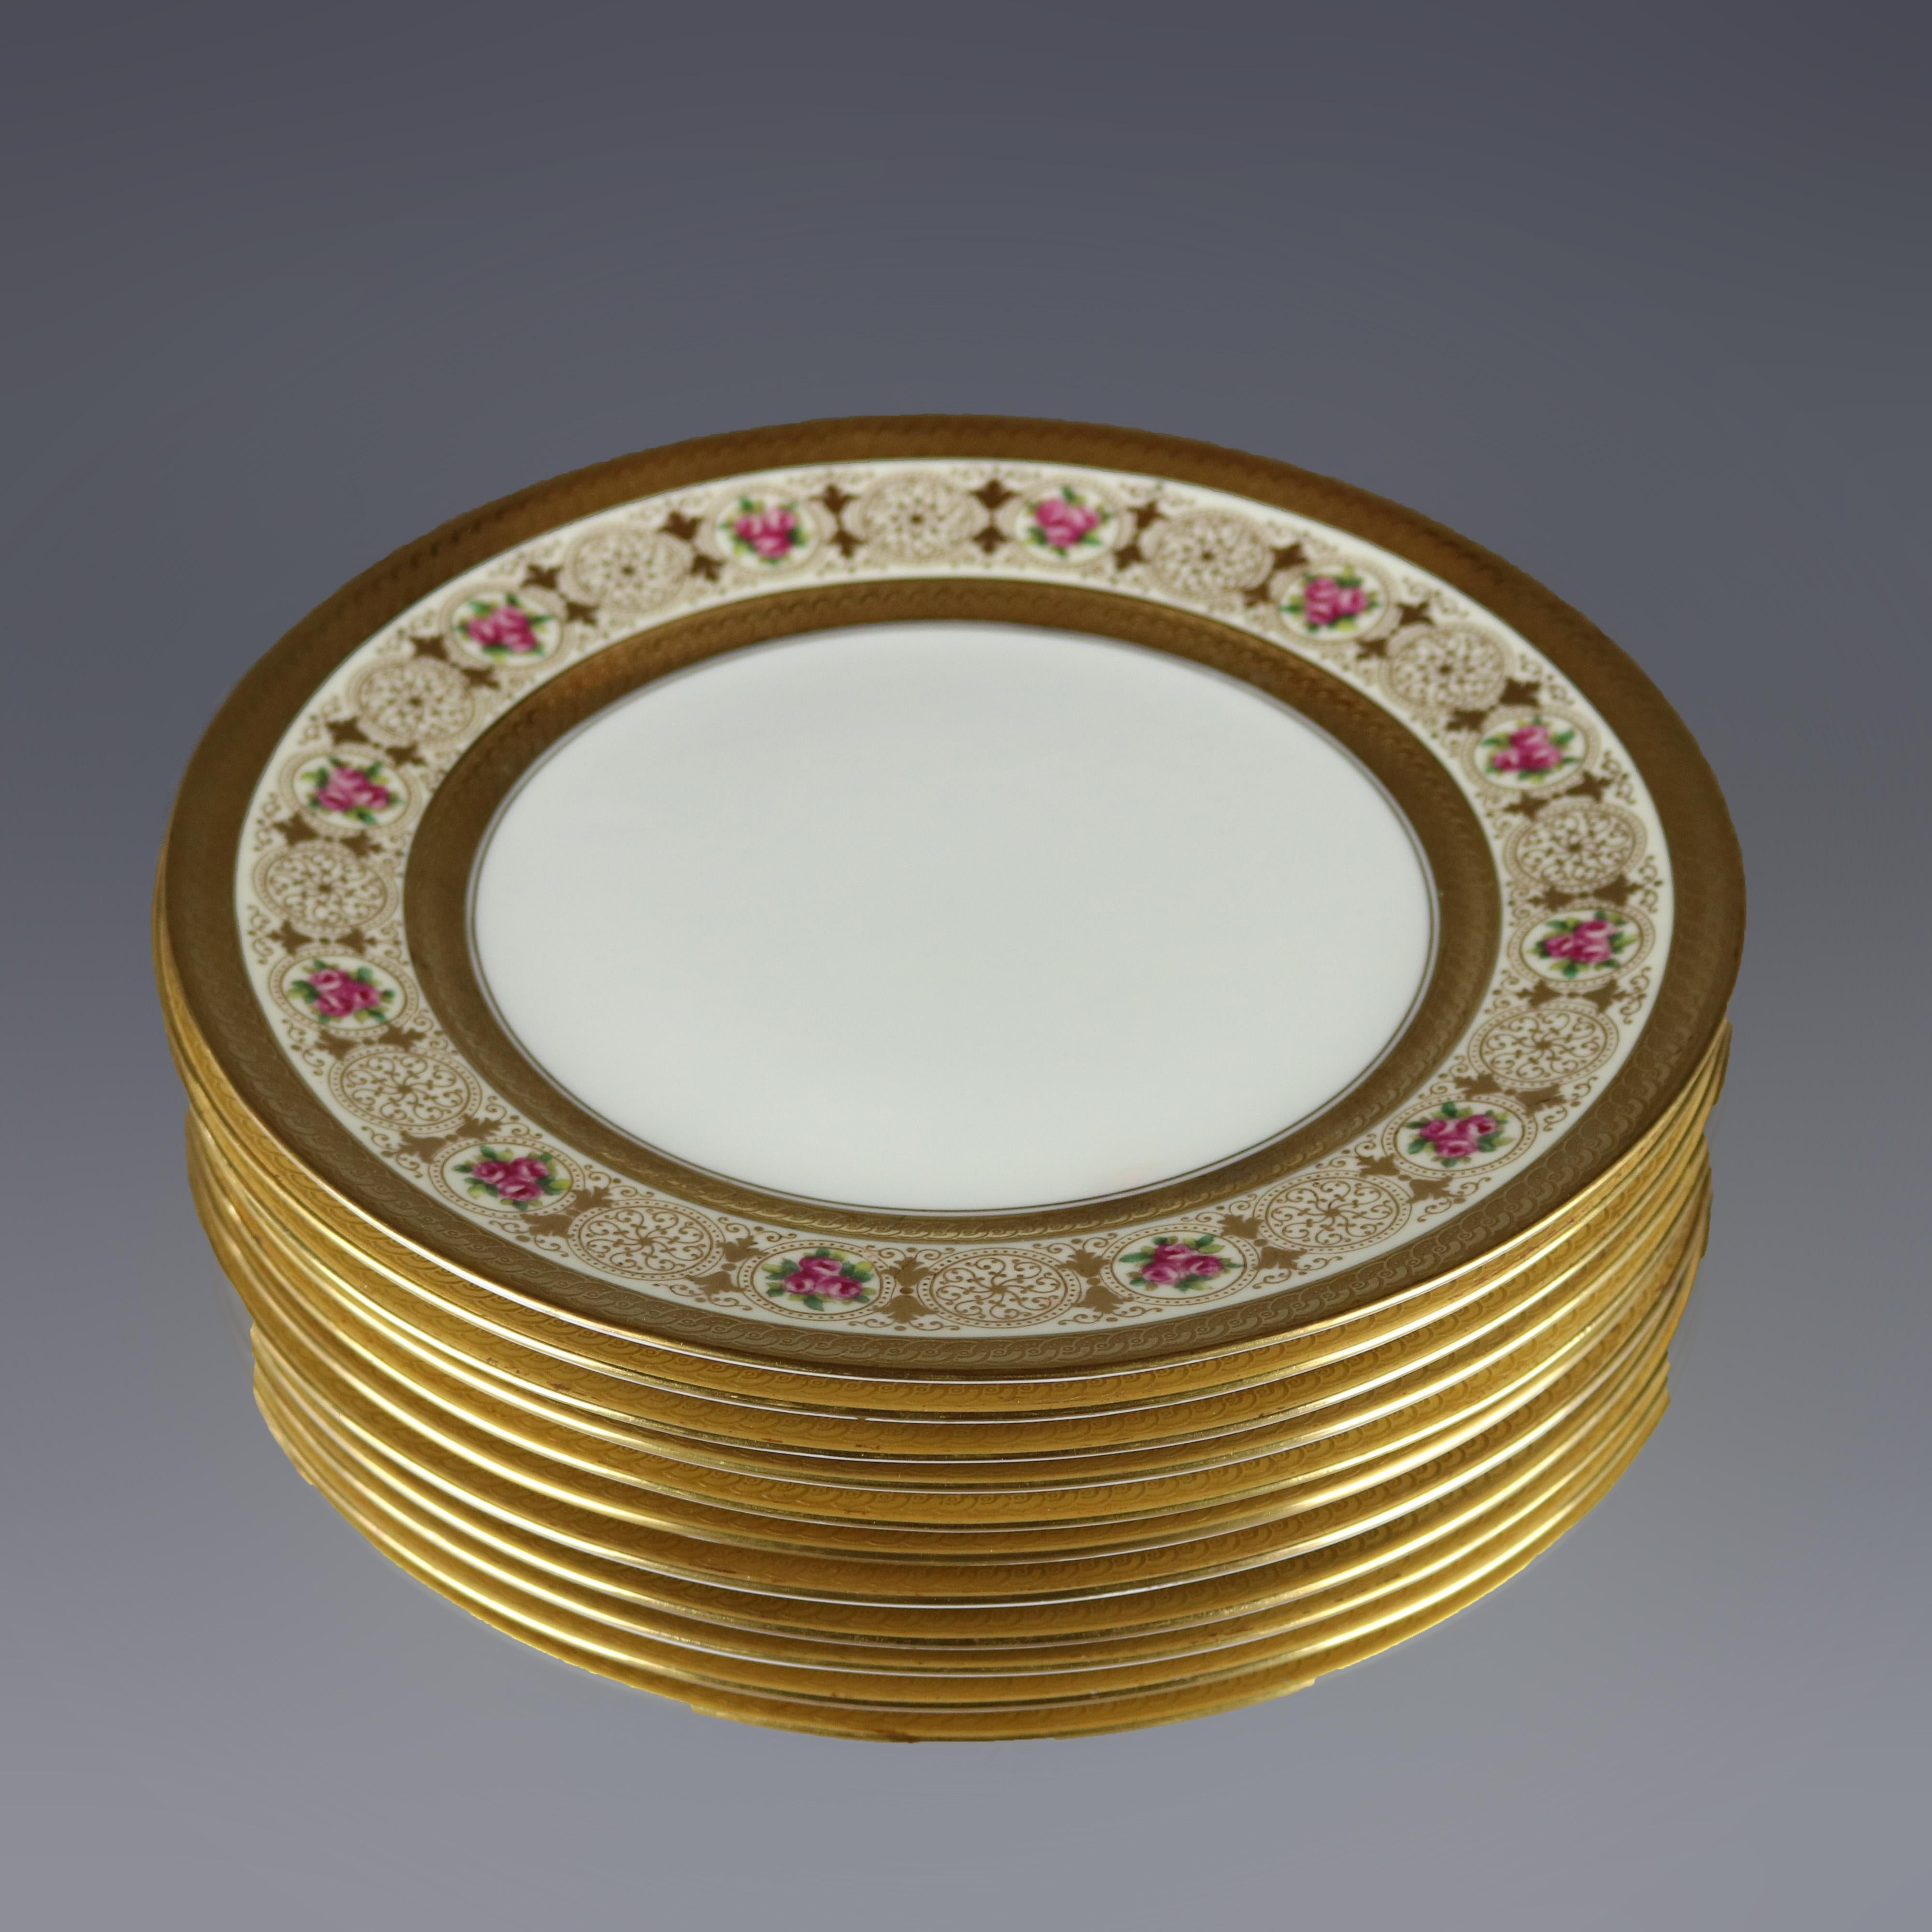 A set of eleven English dinner plates by Cauldon for Beltzer offer heavily gilt rims in scroll and foliate decoration with reserves of roses, maker stamp en verso as photographed, 20th century.

Measures: .75